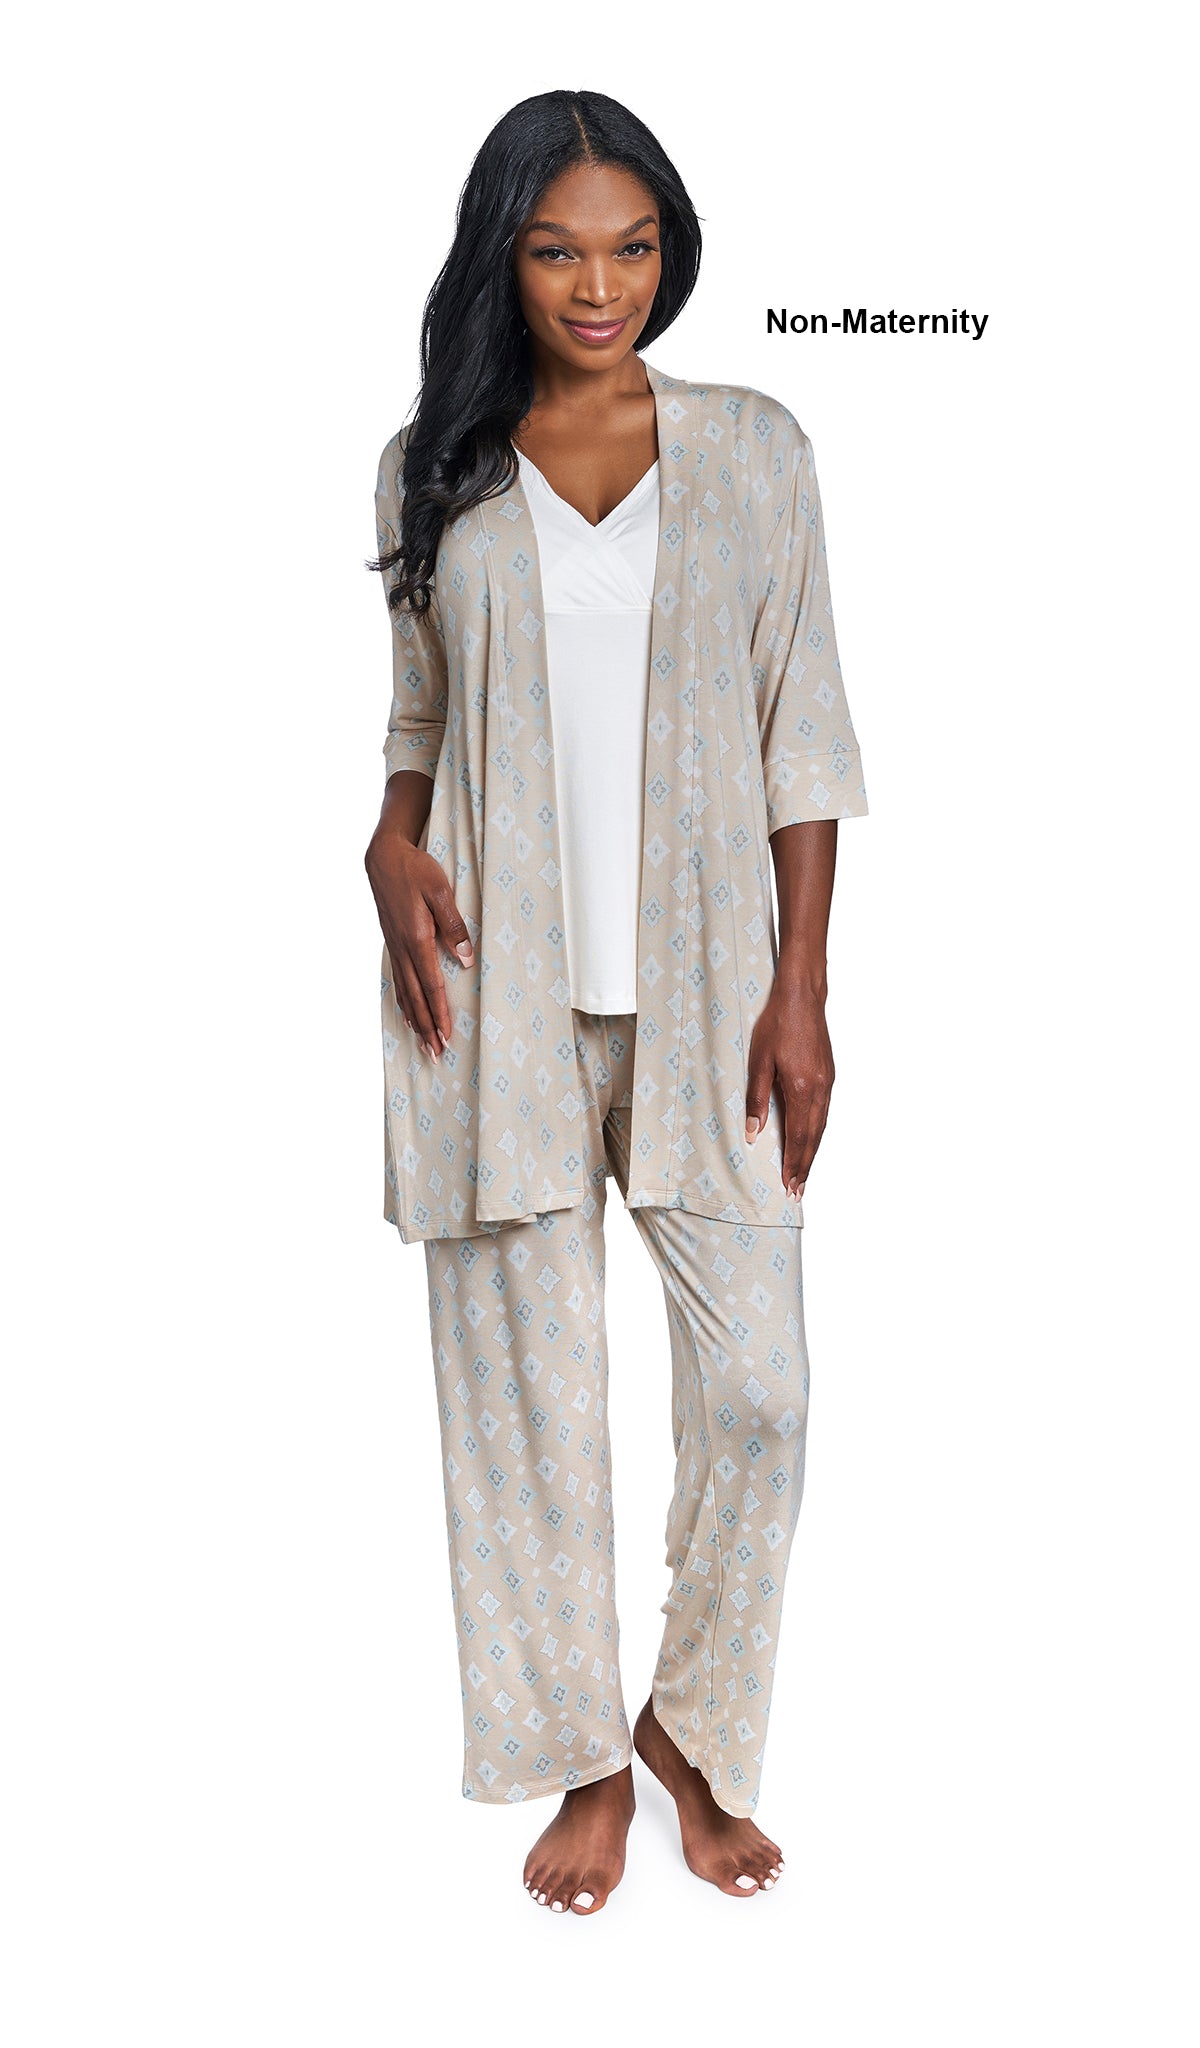 Mosaic Analise 3-Piece Set. Woman wearing 3/4 sleeve robe, tank top and pant as non-maternity.